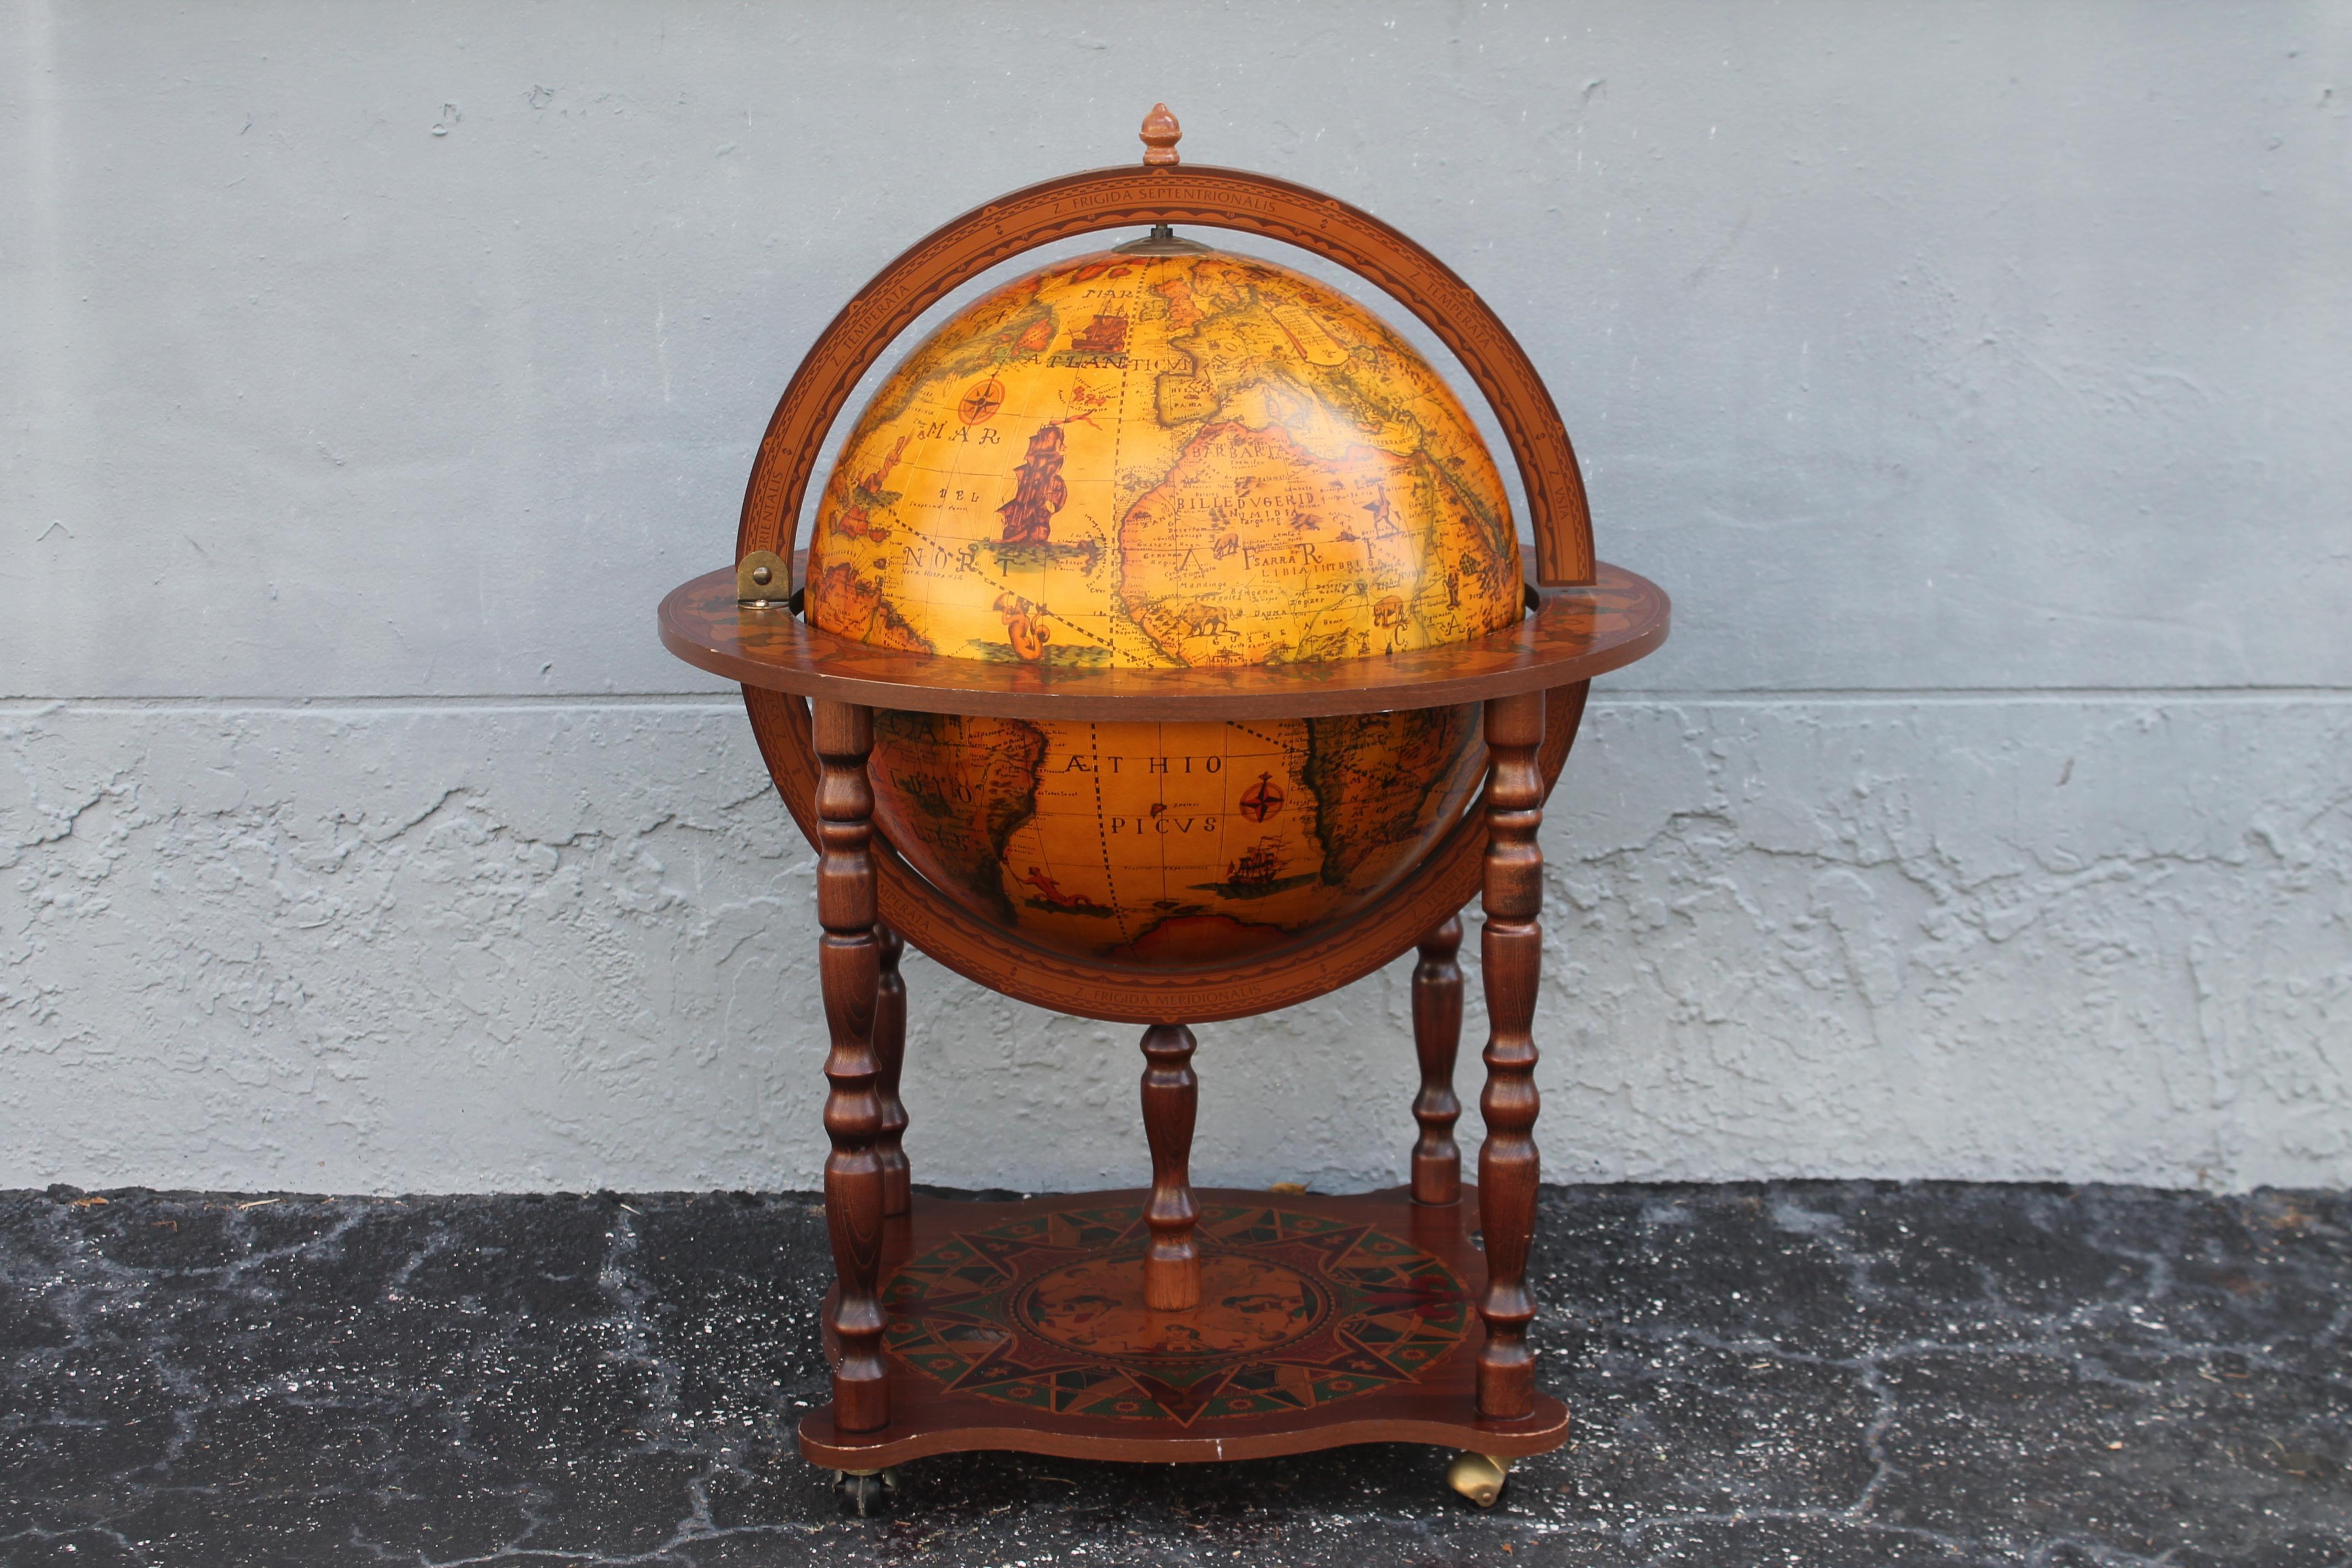 1960's Mid Century Modern World Globe Dry Bar. Very collectable and very decorative. Makes a great dry bar with storage interior.